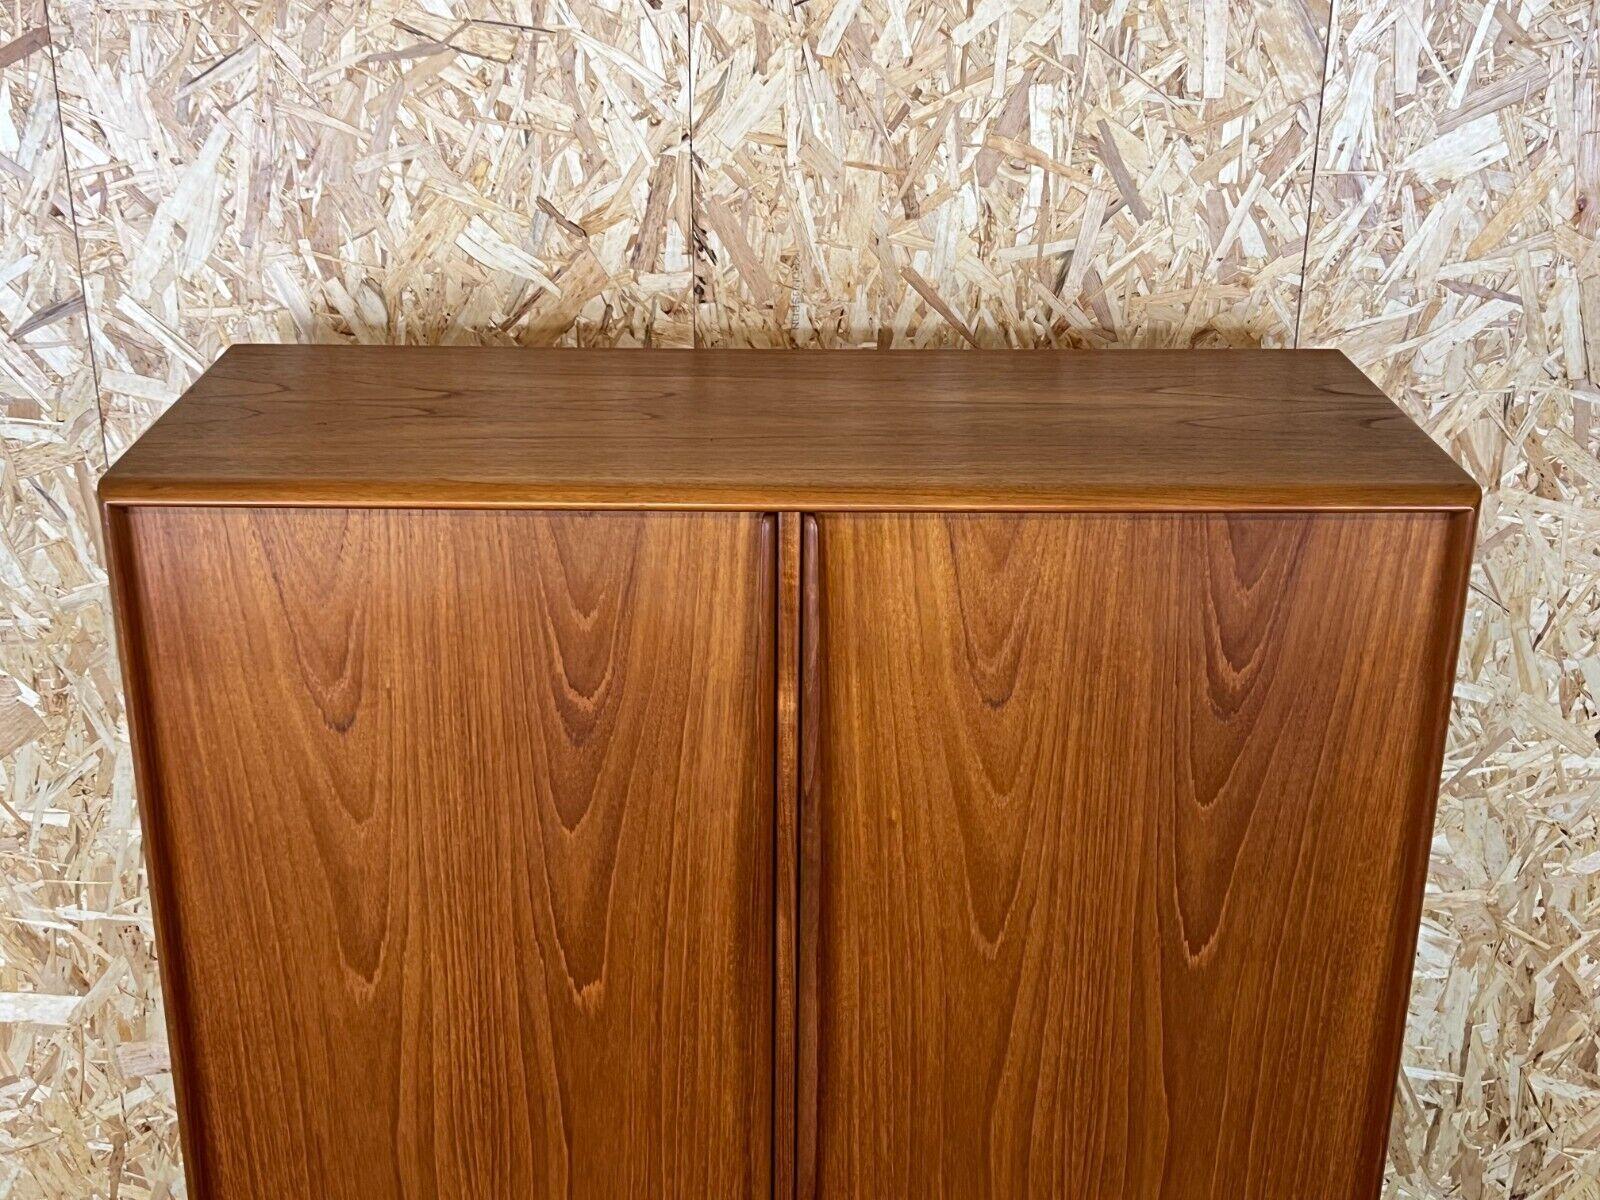 Late 20th Century 1960s-1970s Teak Sideboard Credenza by Svend Aage Madsen for Knudsen & Son